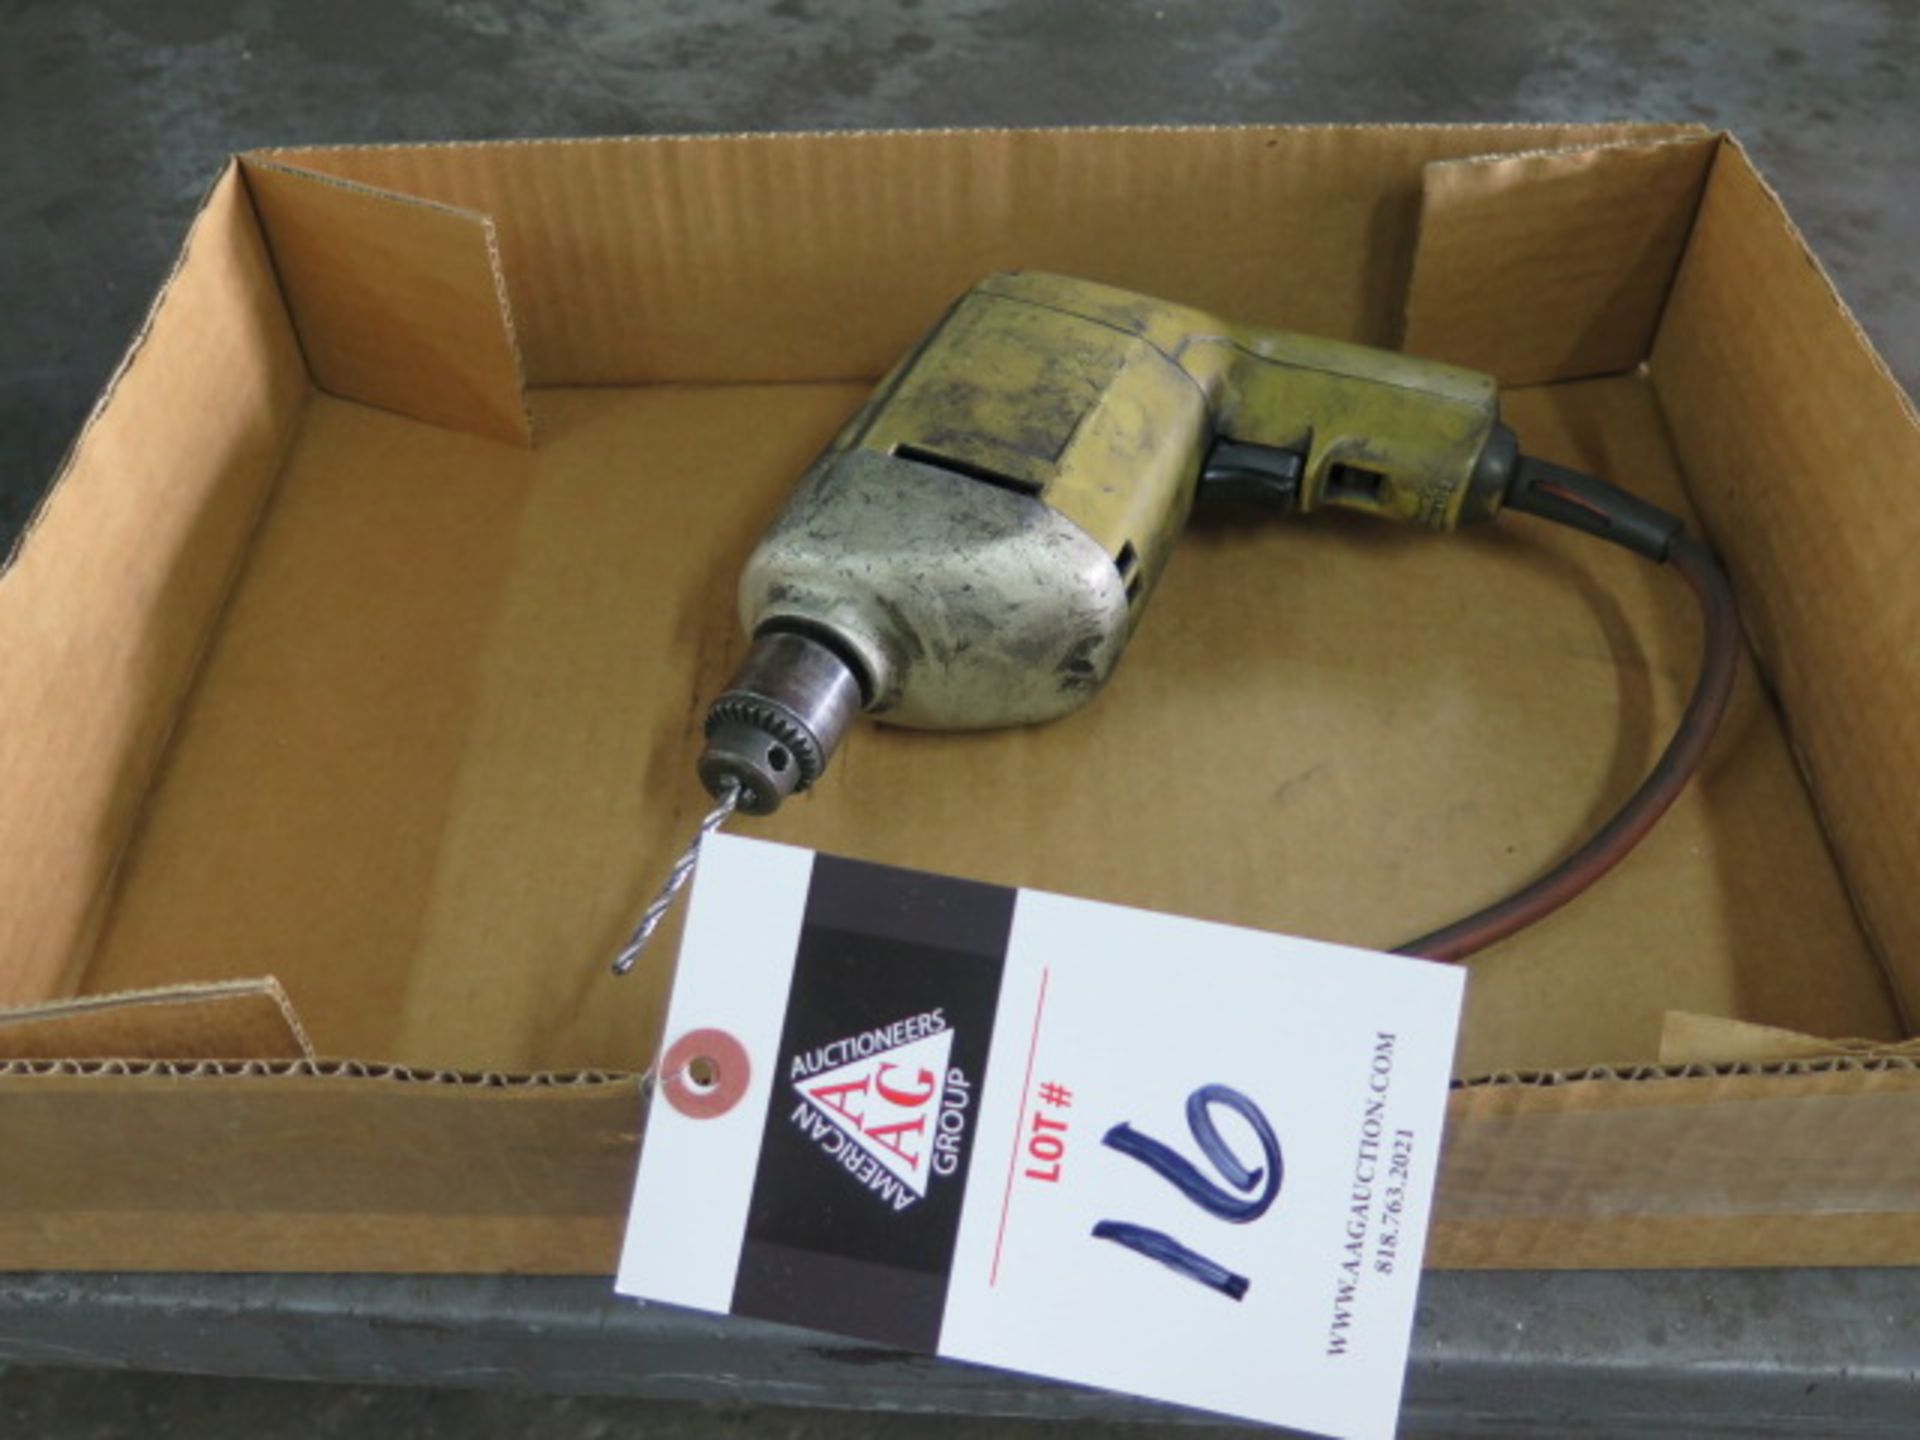 Electric Drill (SOLD AS-IS - NO WARRANTY)